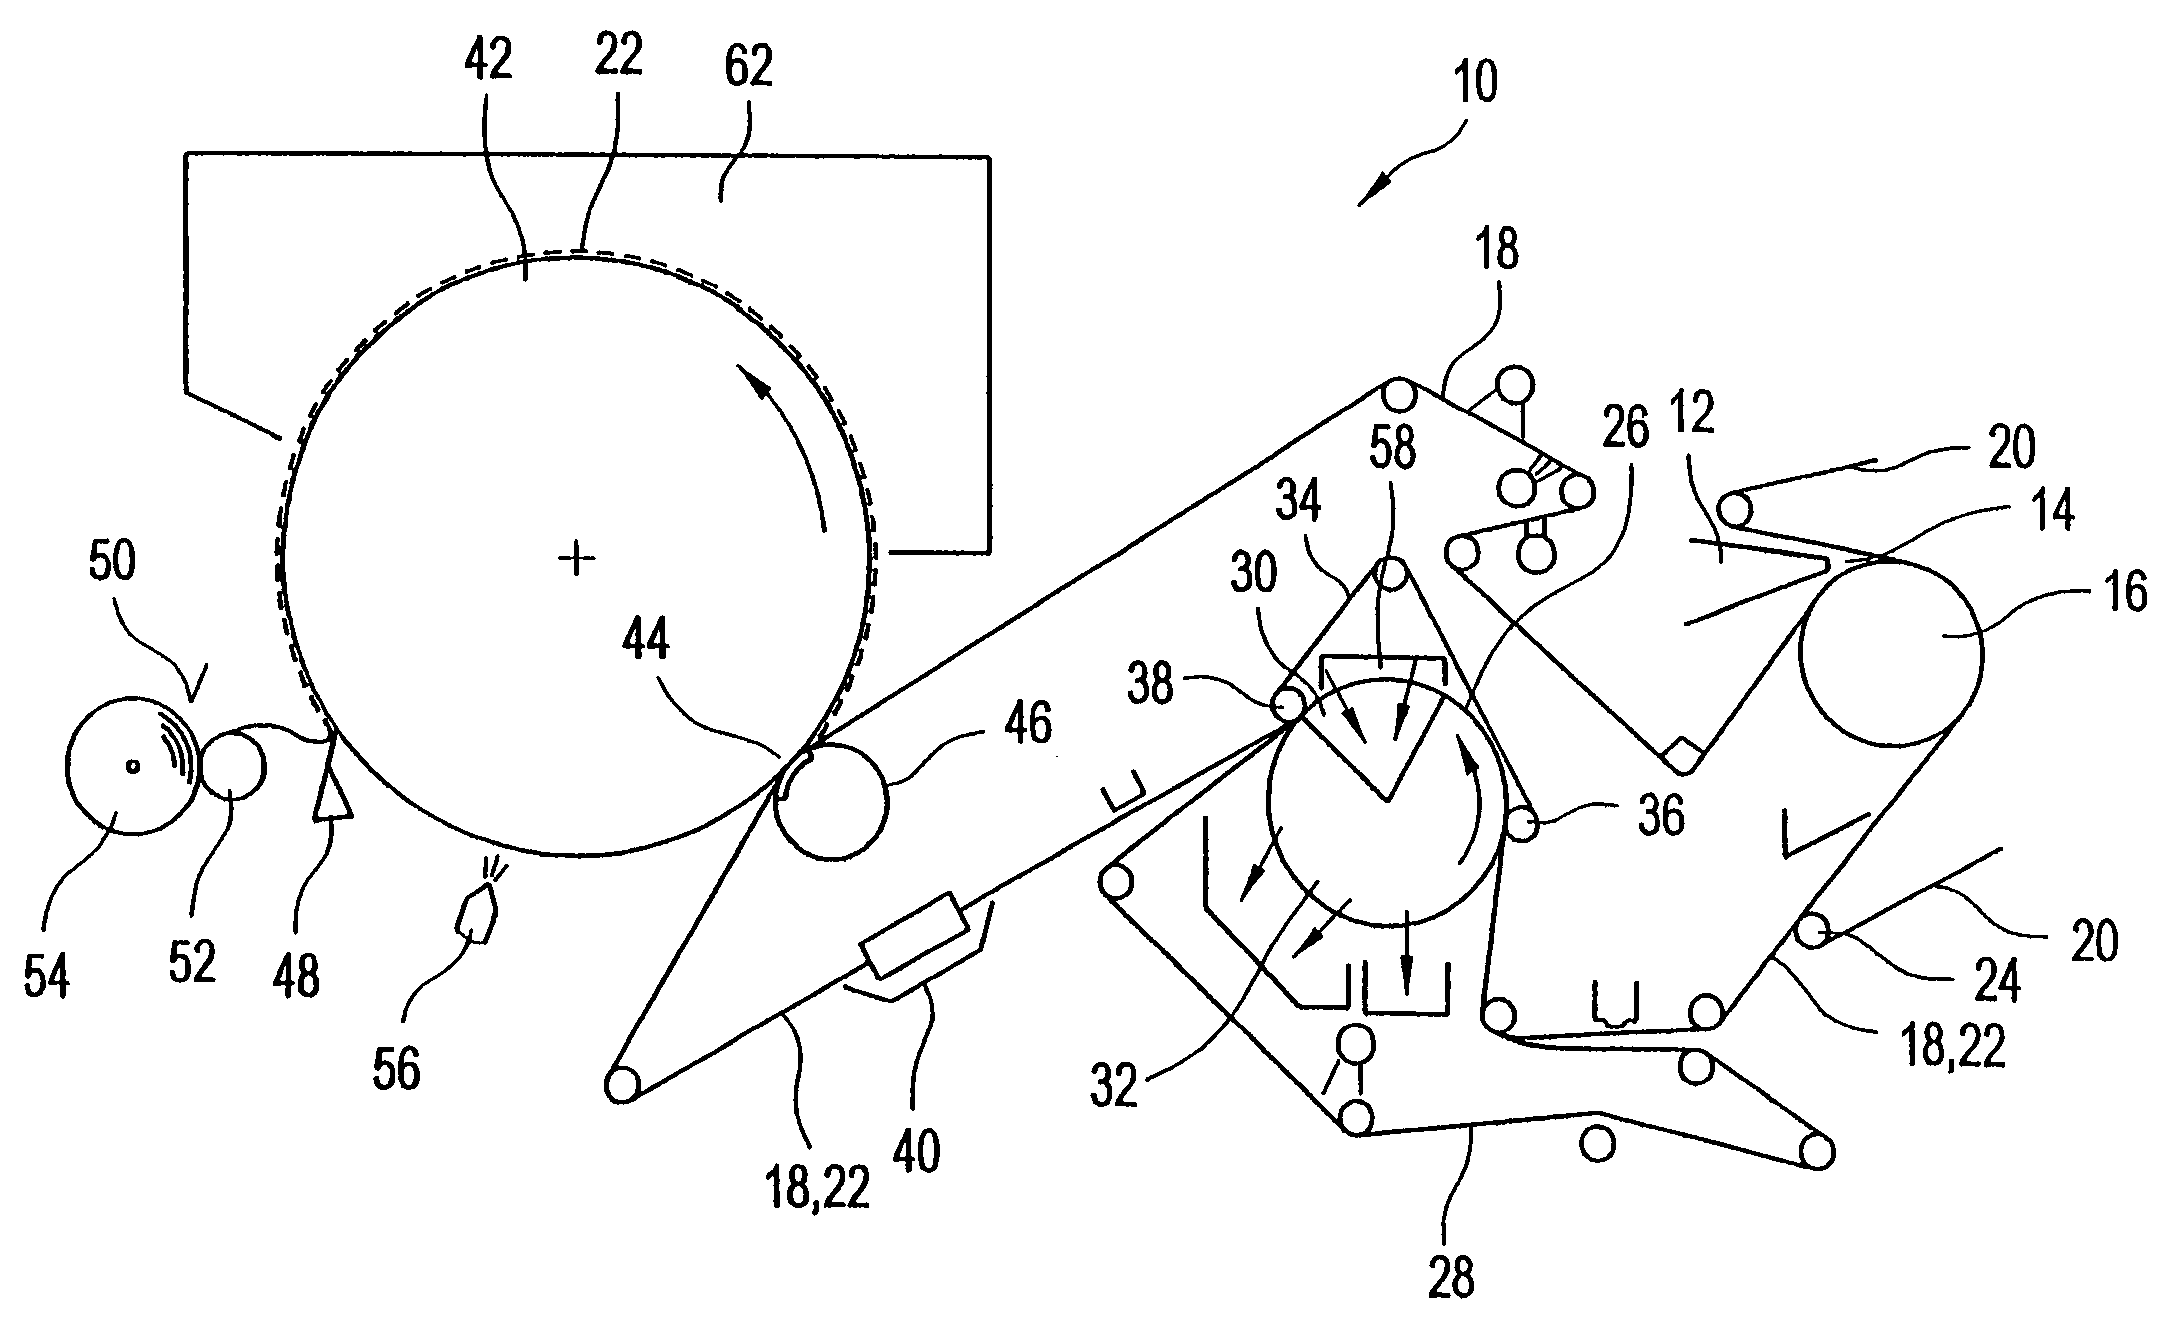 Process and apparatus for producing a tissue web